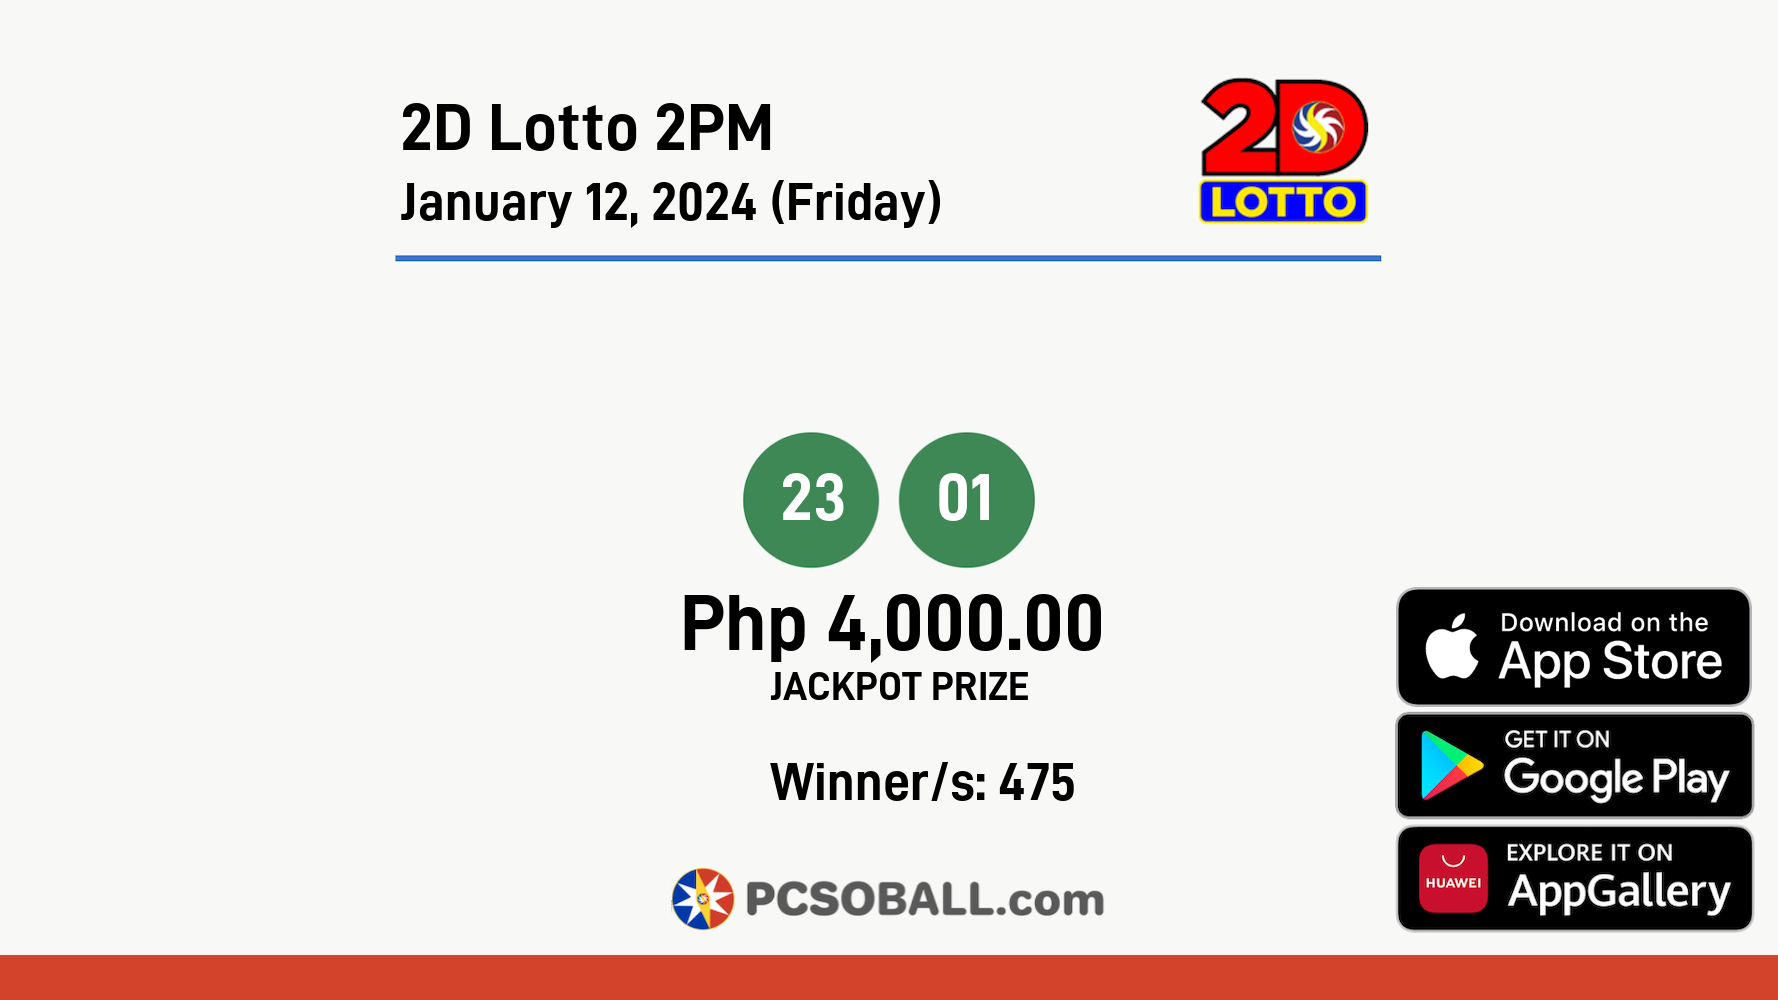 2D Lotto 2PM January 12, 2024 (Friday) Result